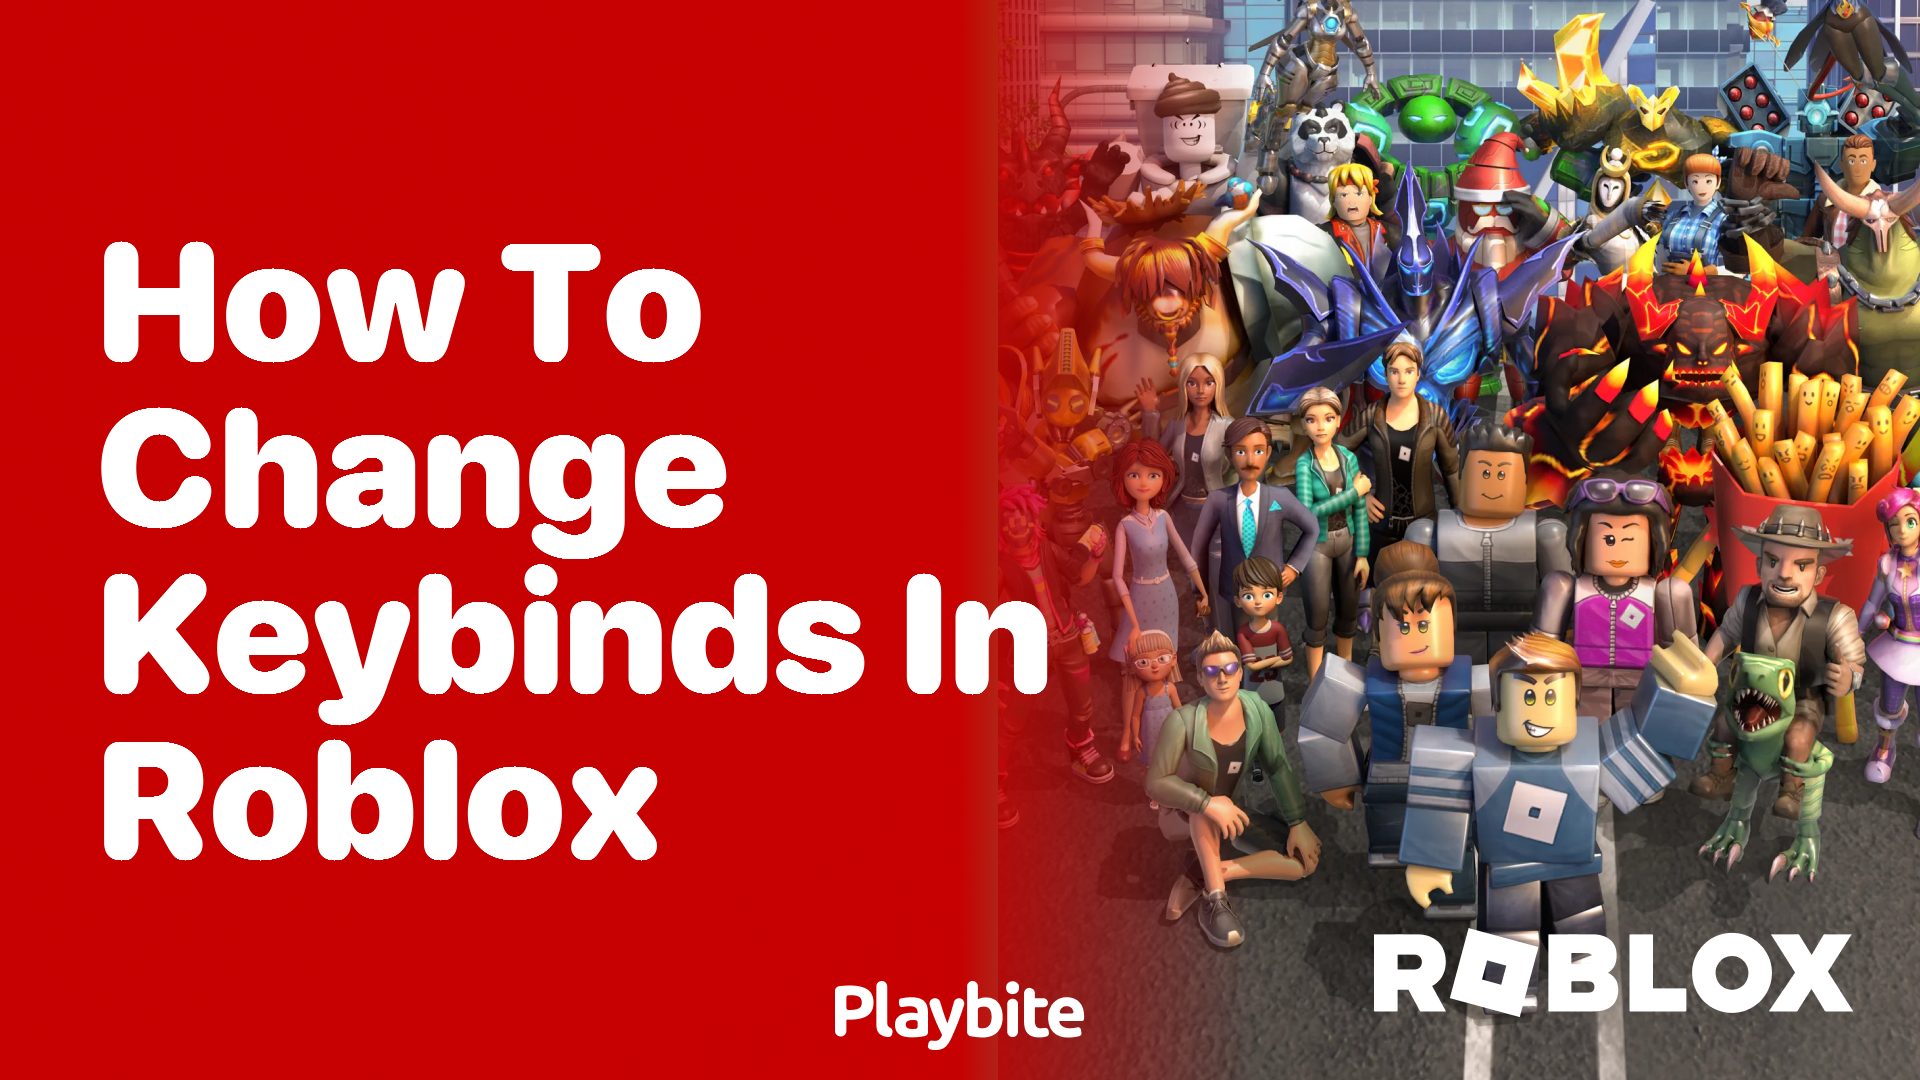 How to Change Keybinds in Roblox: A Simple Guide